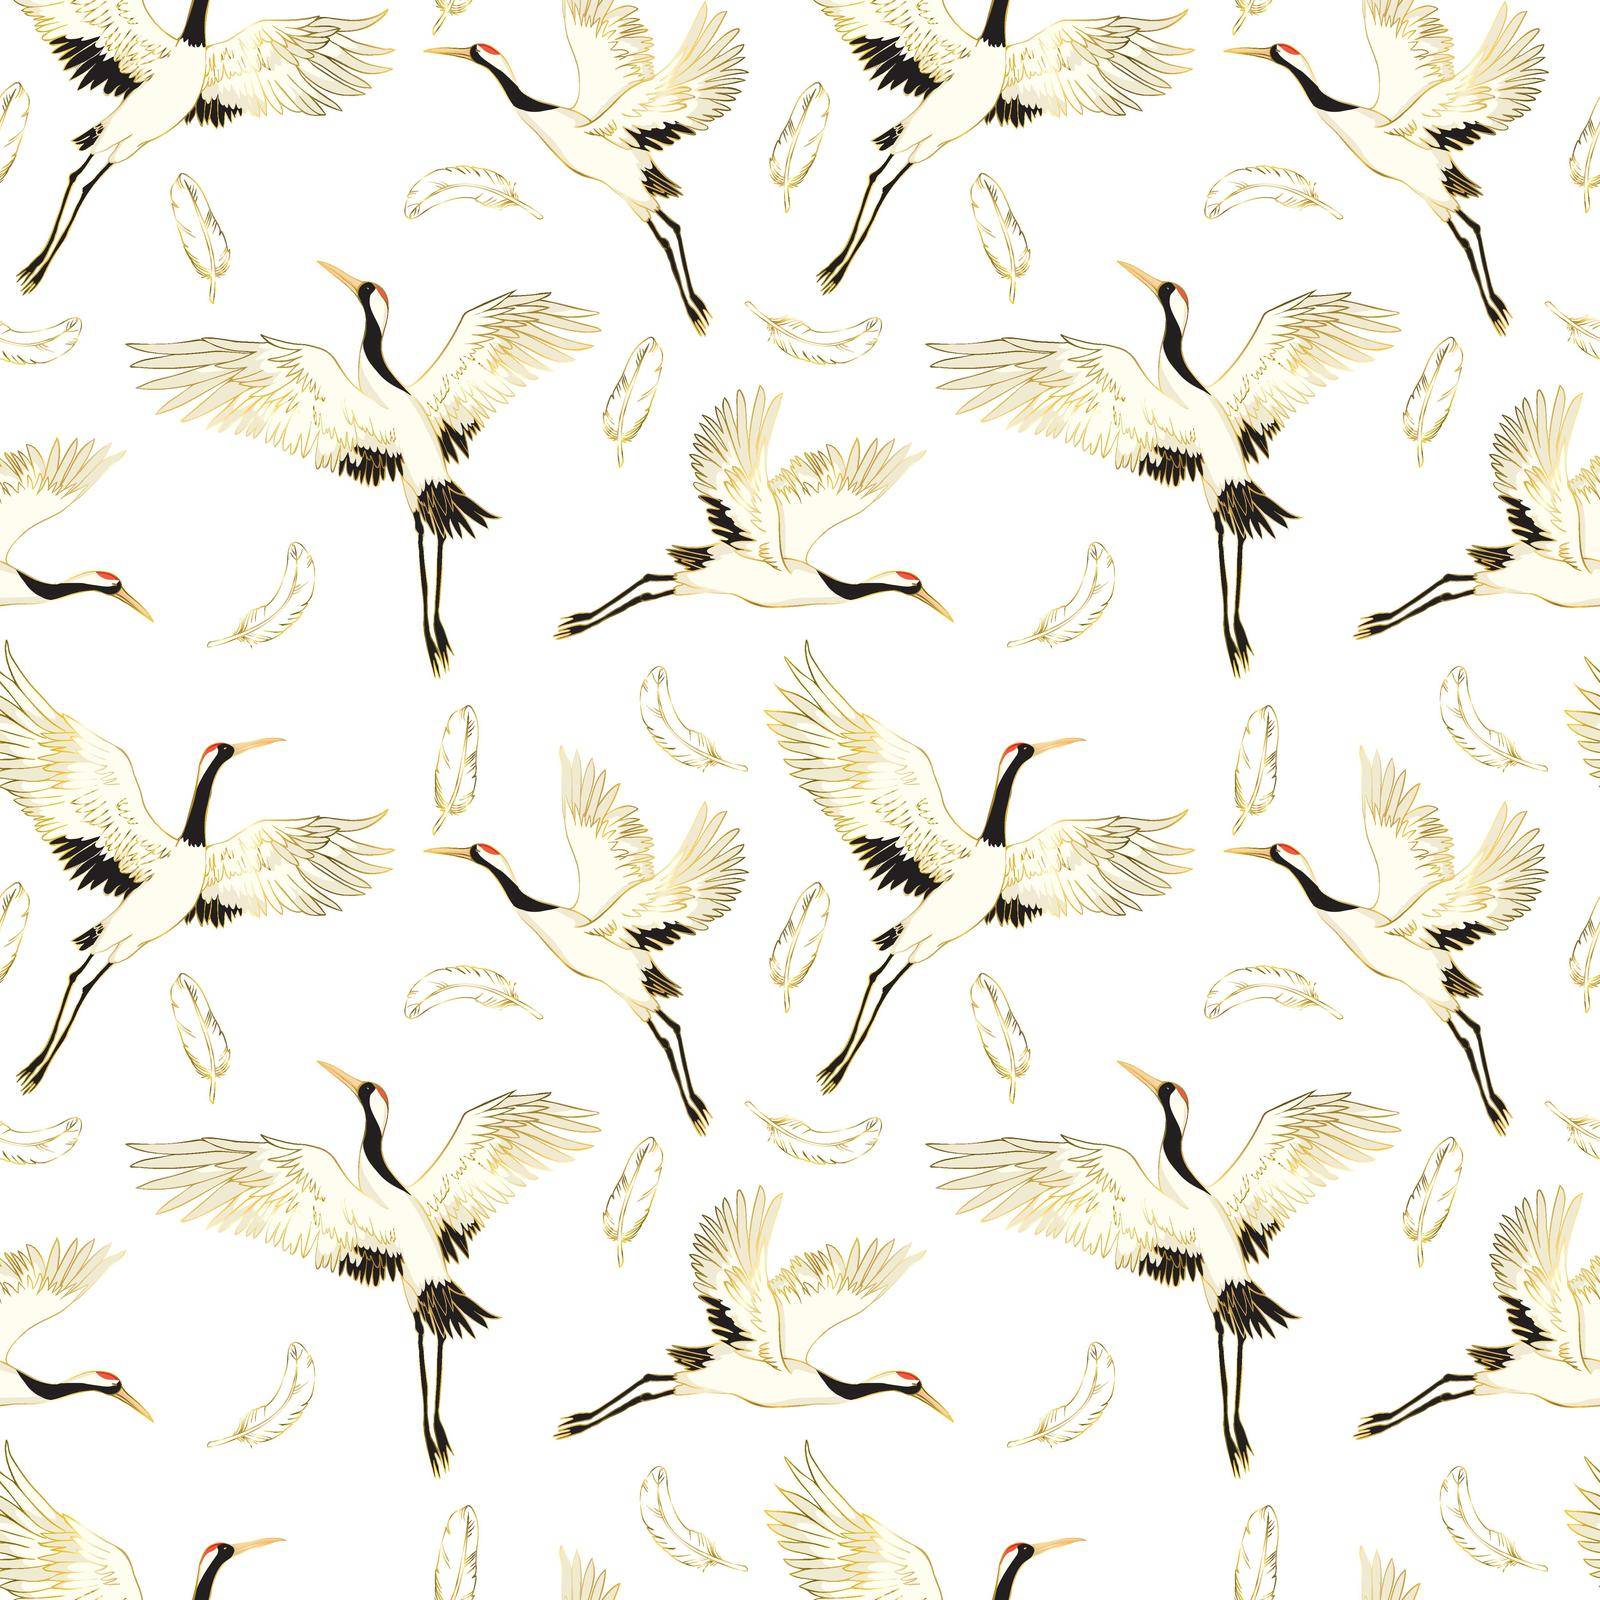 Decorative kimono floral motif background pattern with crane and flowers by Vladimir90